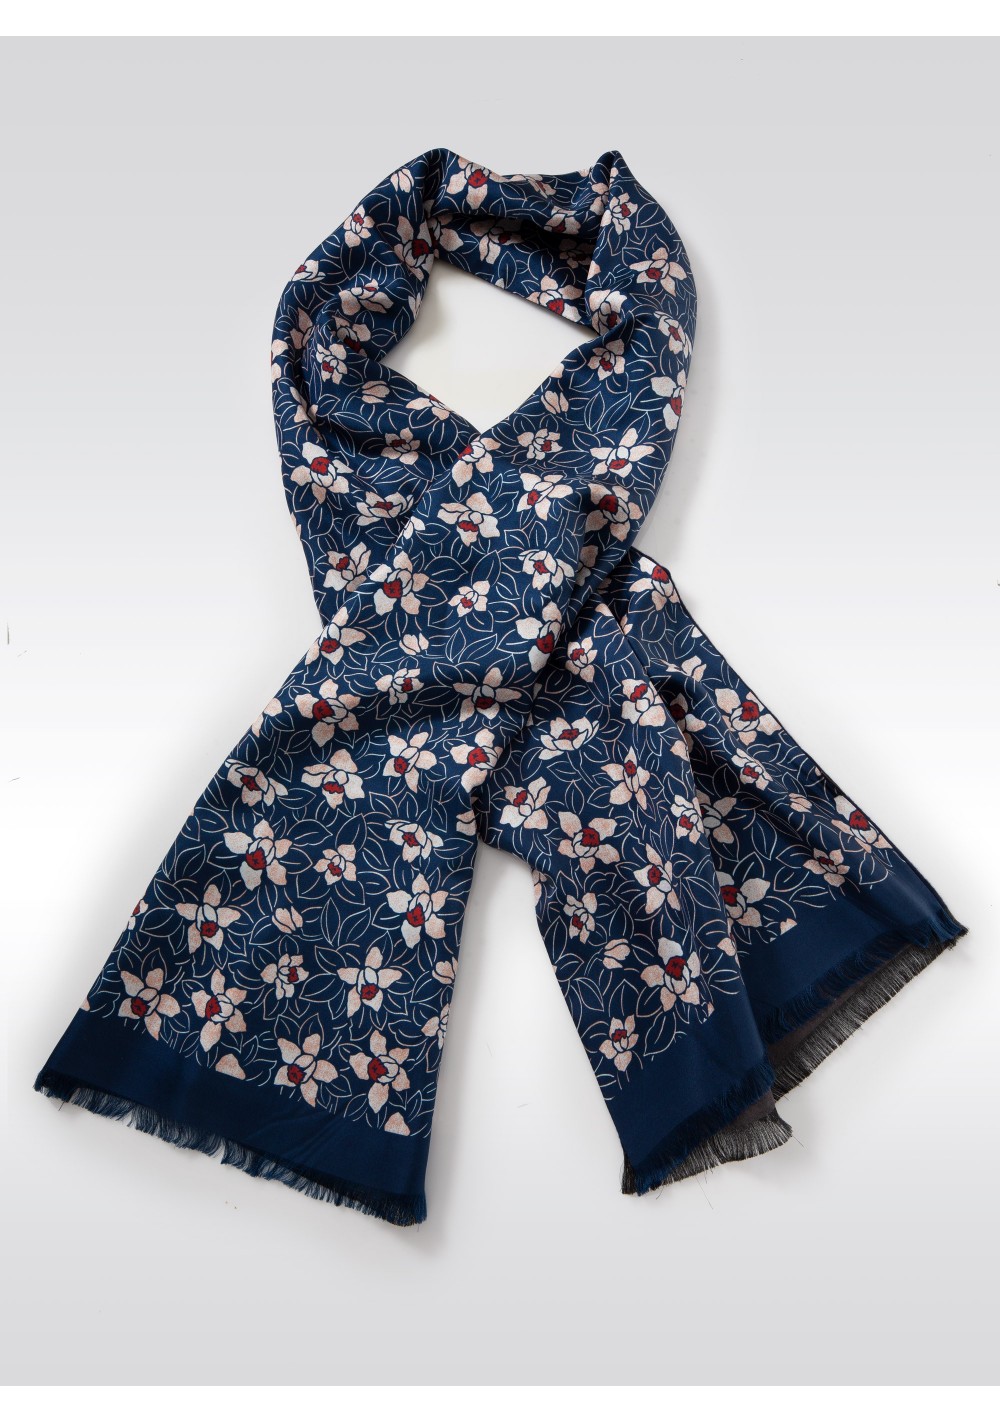 https://www.cheap-neckties.com/26657-xlarge_default/oversized-silk-scarf-with-japanese-floral-print-p-23557.jpg